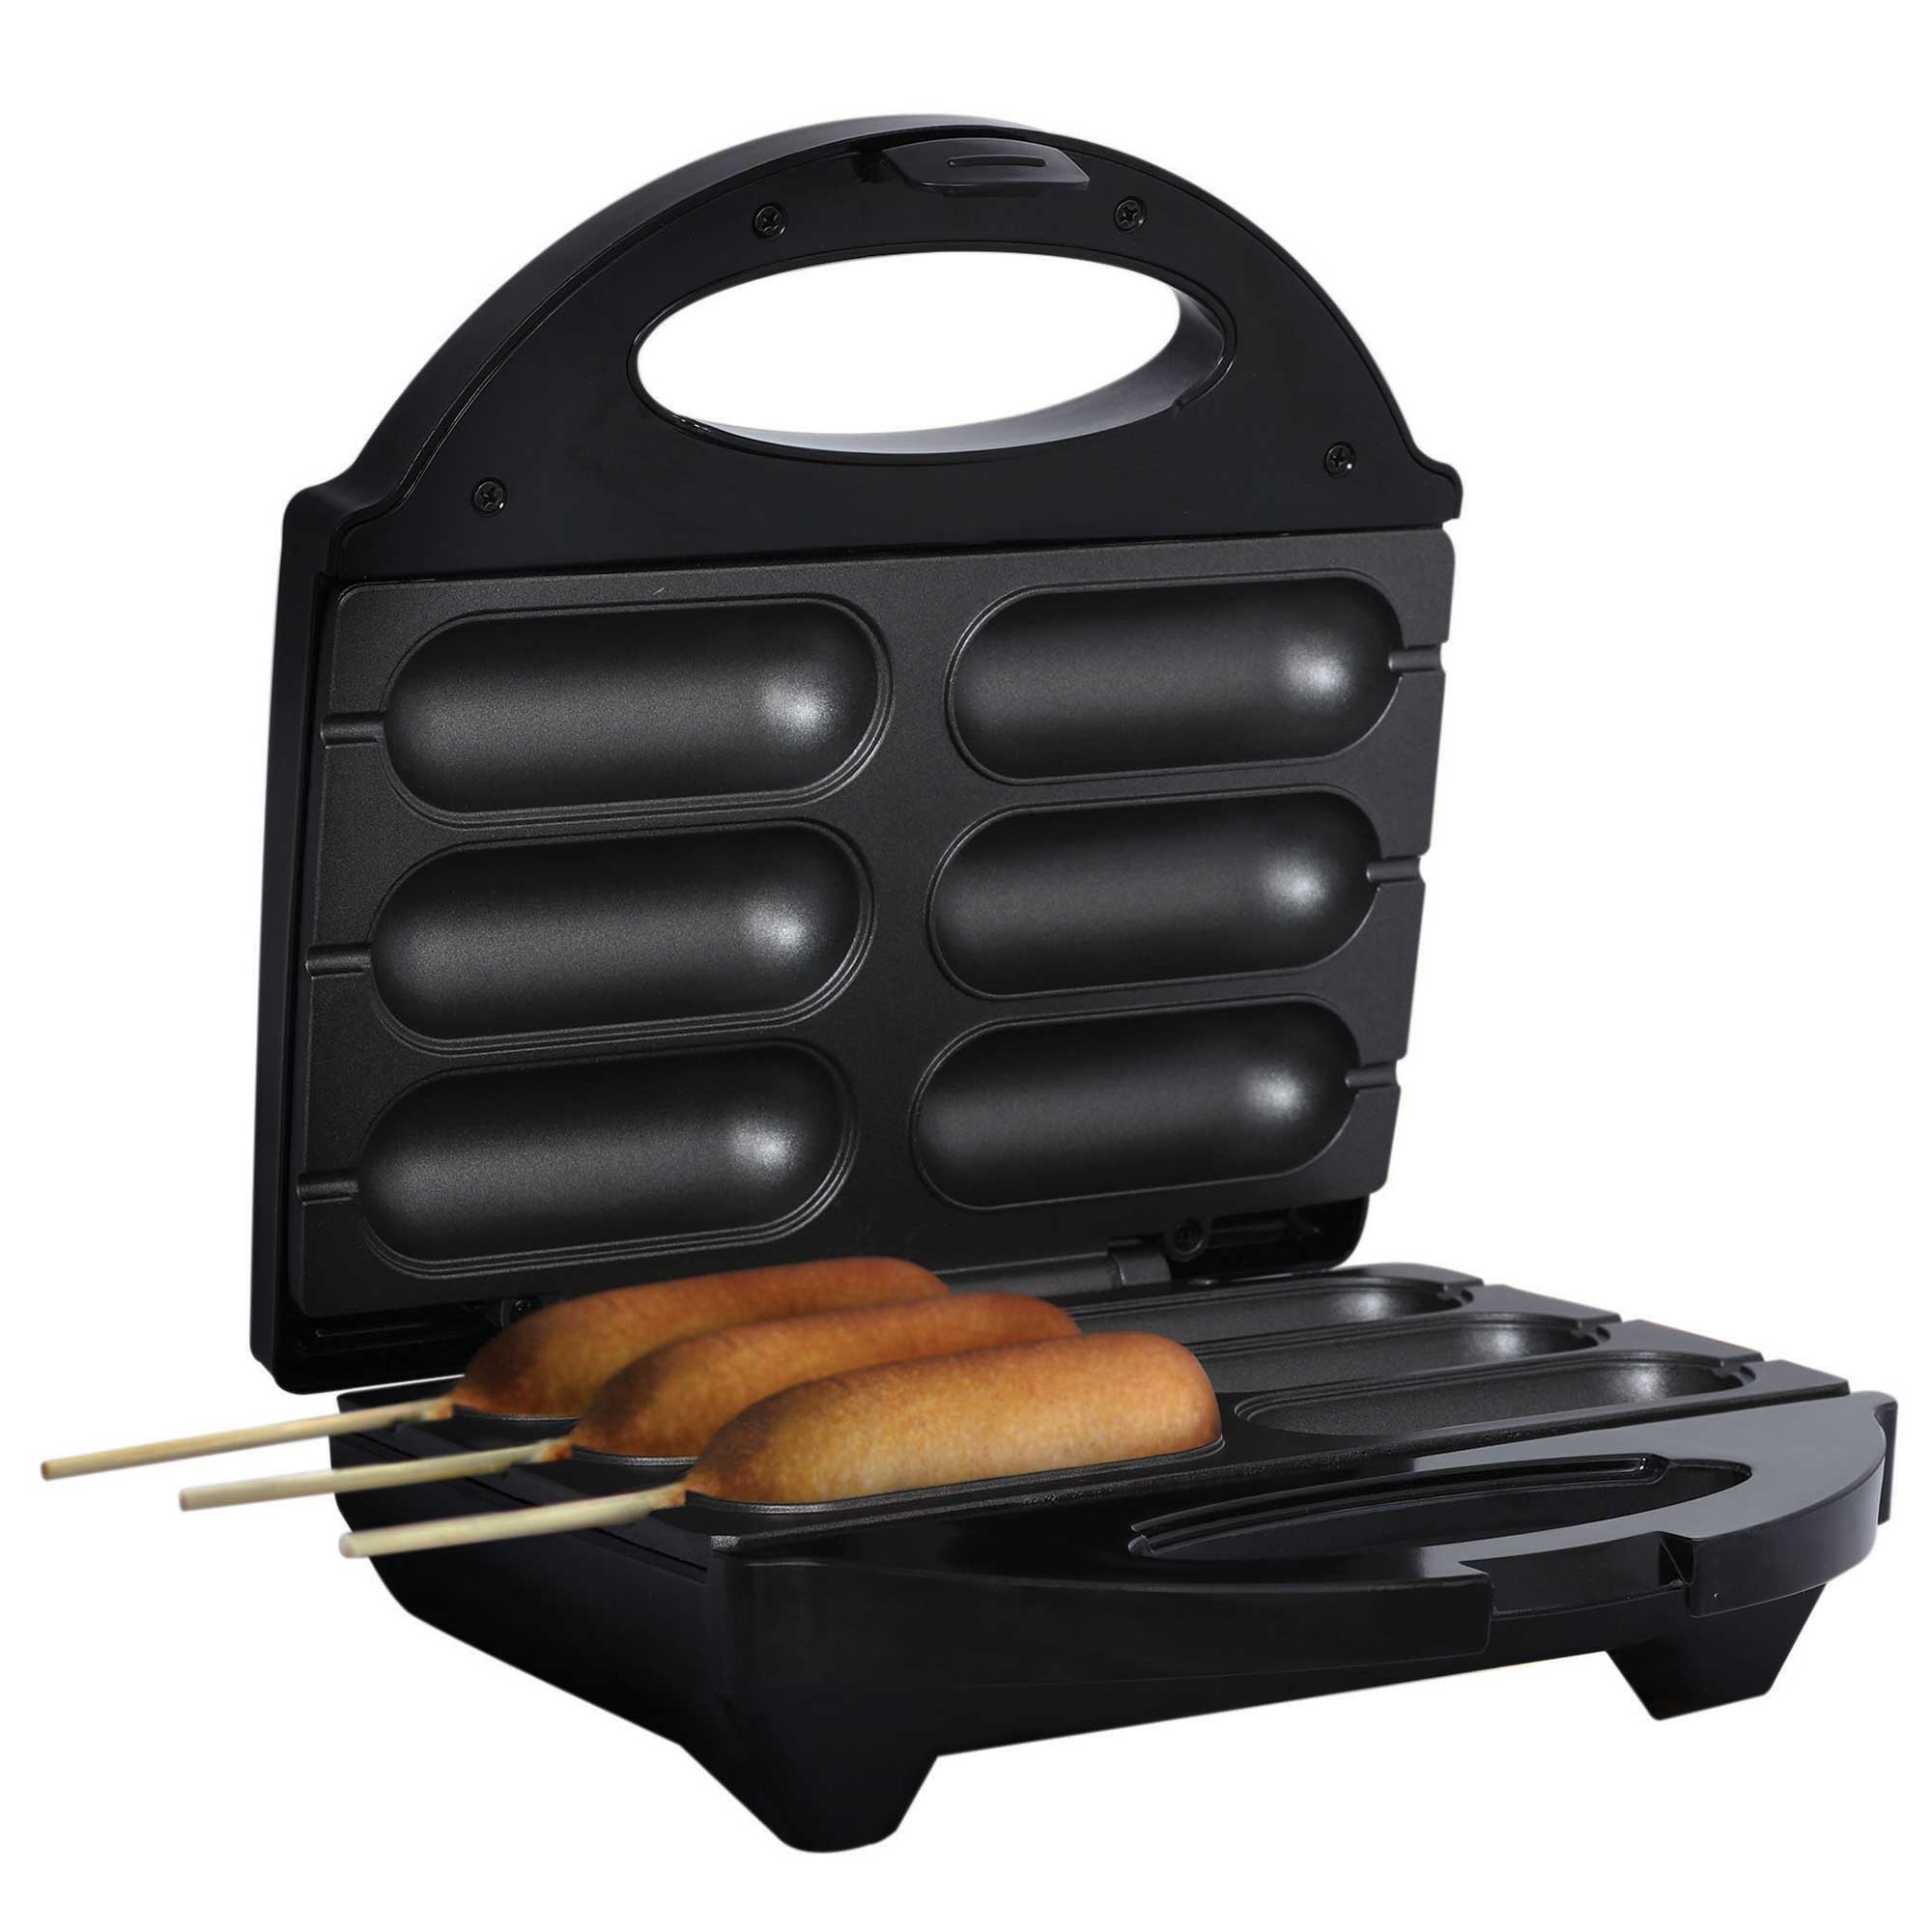 Brentwood TS-601S Non-Stick 6 Mini Corn Dog Maker, Stainless Steel